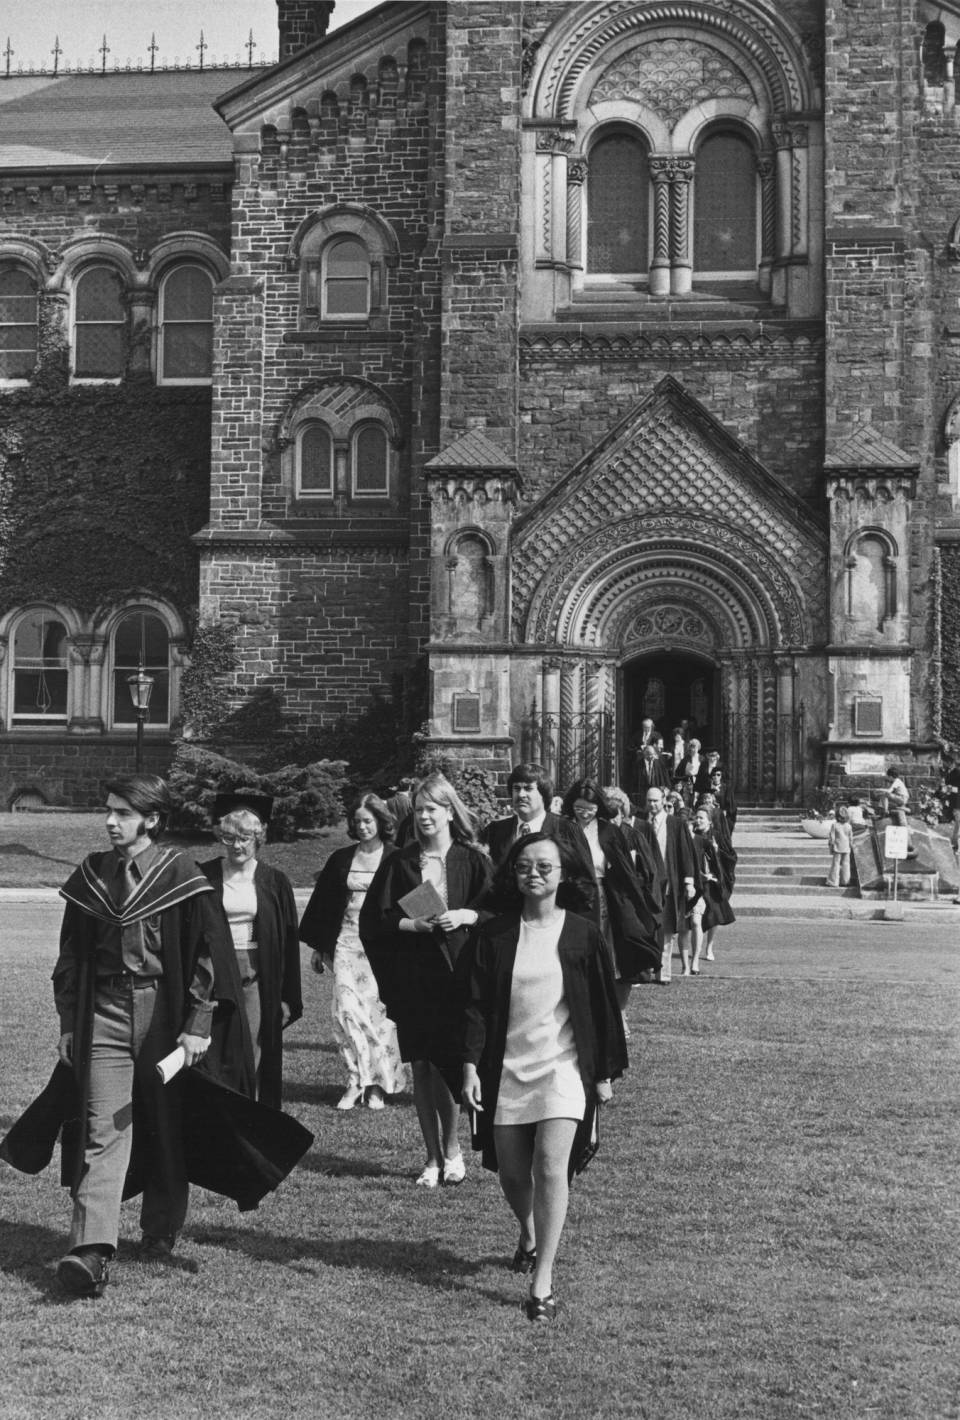 About twenty people in academic robes walking across front campus, with University College in the background